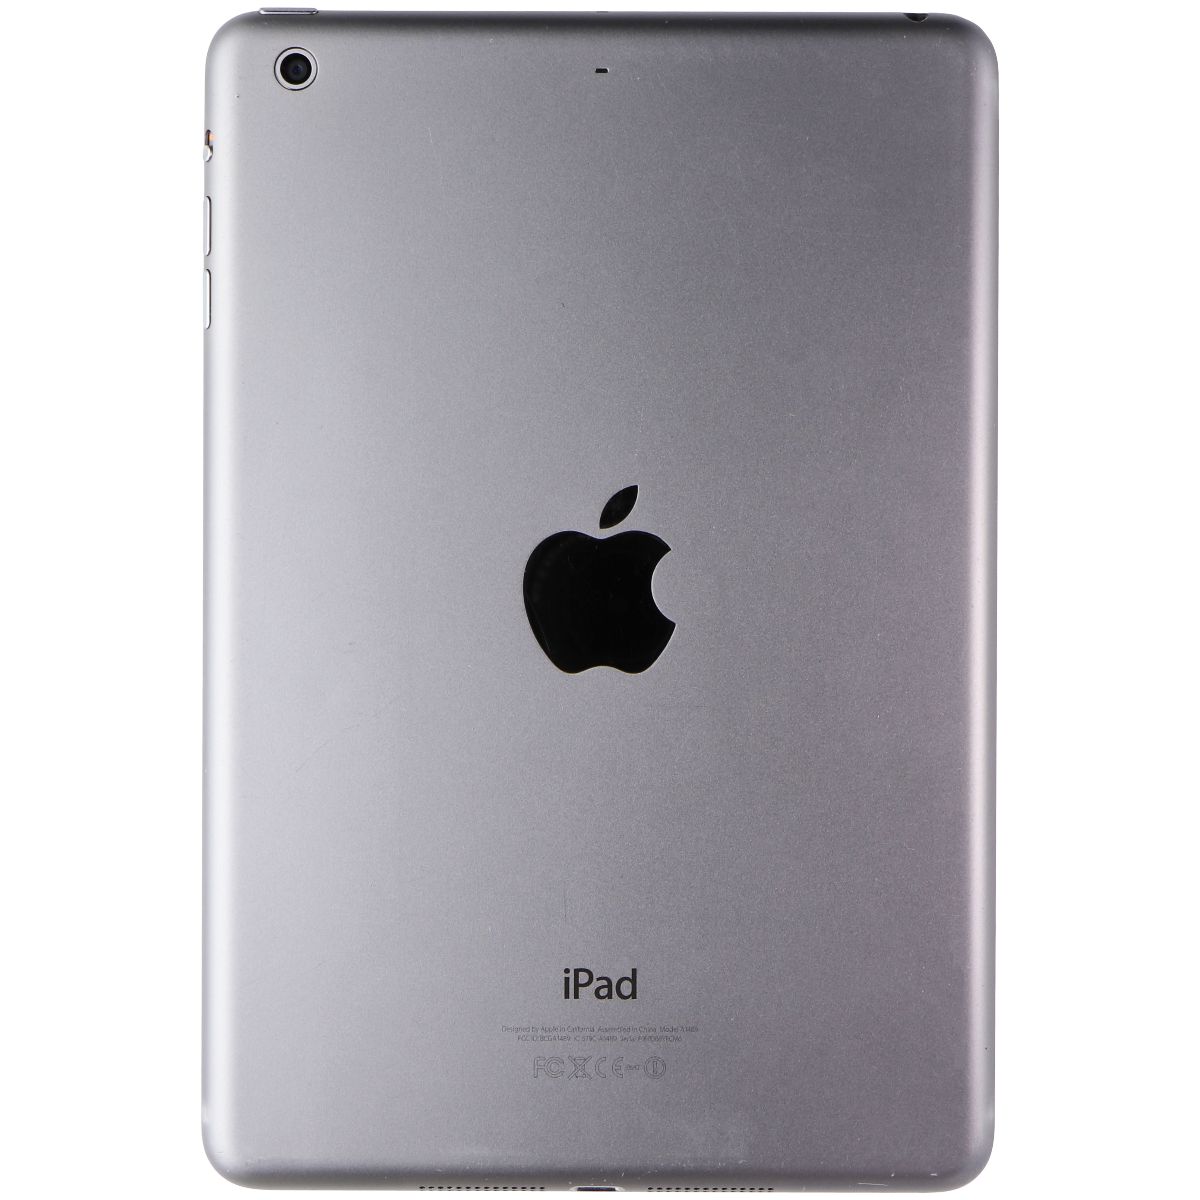 Apple iPad mini 2 (Wi-Fi Only) A1489 - 16GB/Space Gray (ME276LL/A) iPads, Tablets & eBook Readers Apple    - Simple Cell Bulk Wholesale Pricing - USA Seller